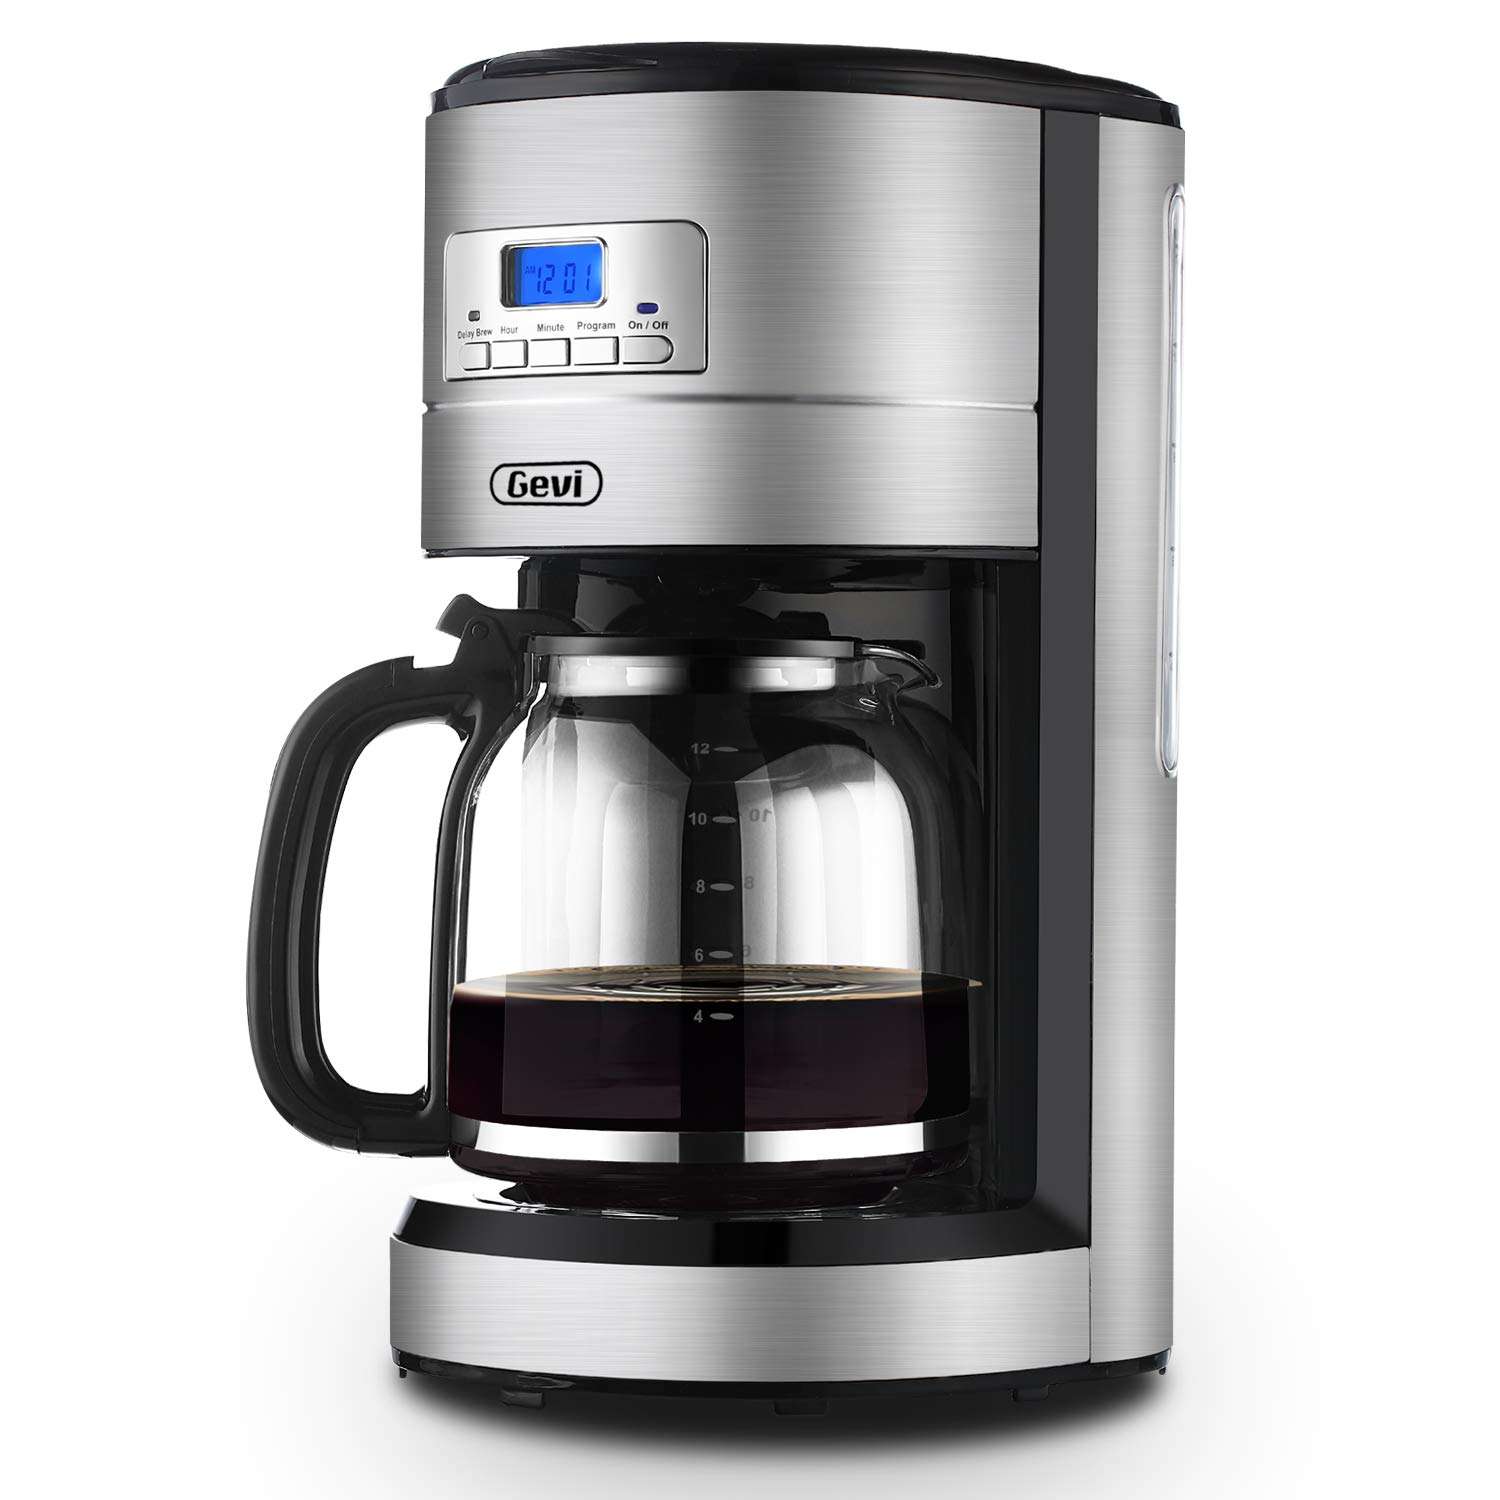 Best highest rated home coffee maker